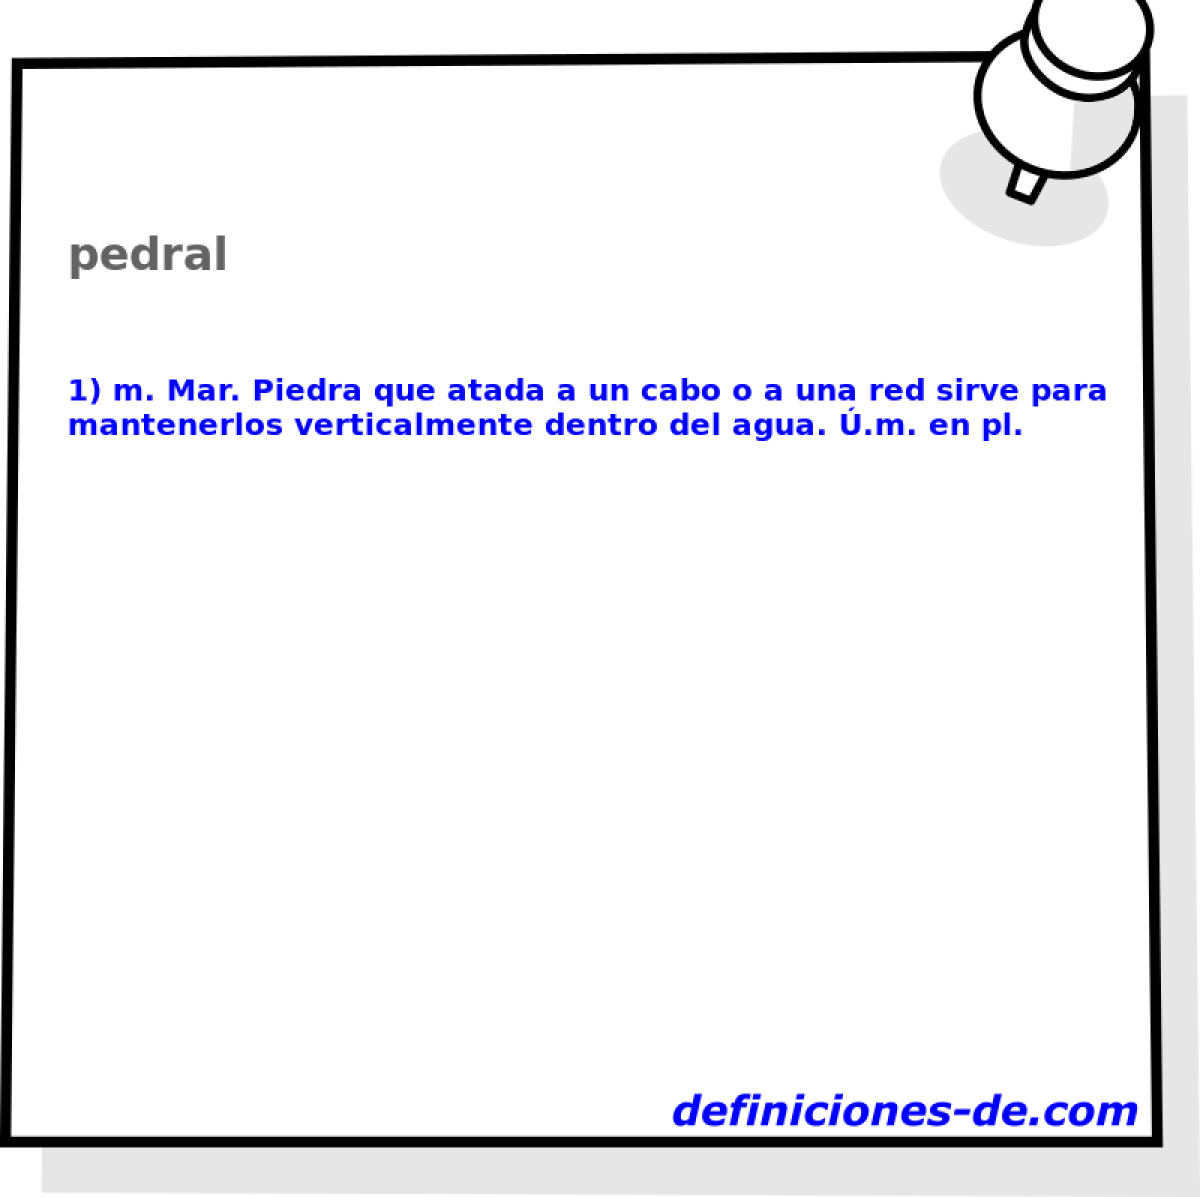 pedral 